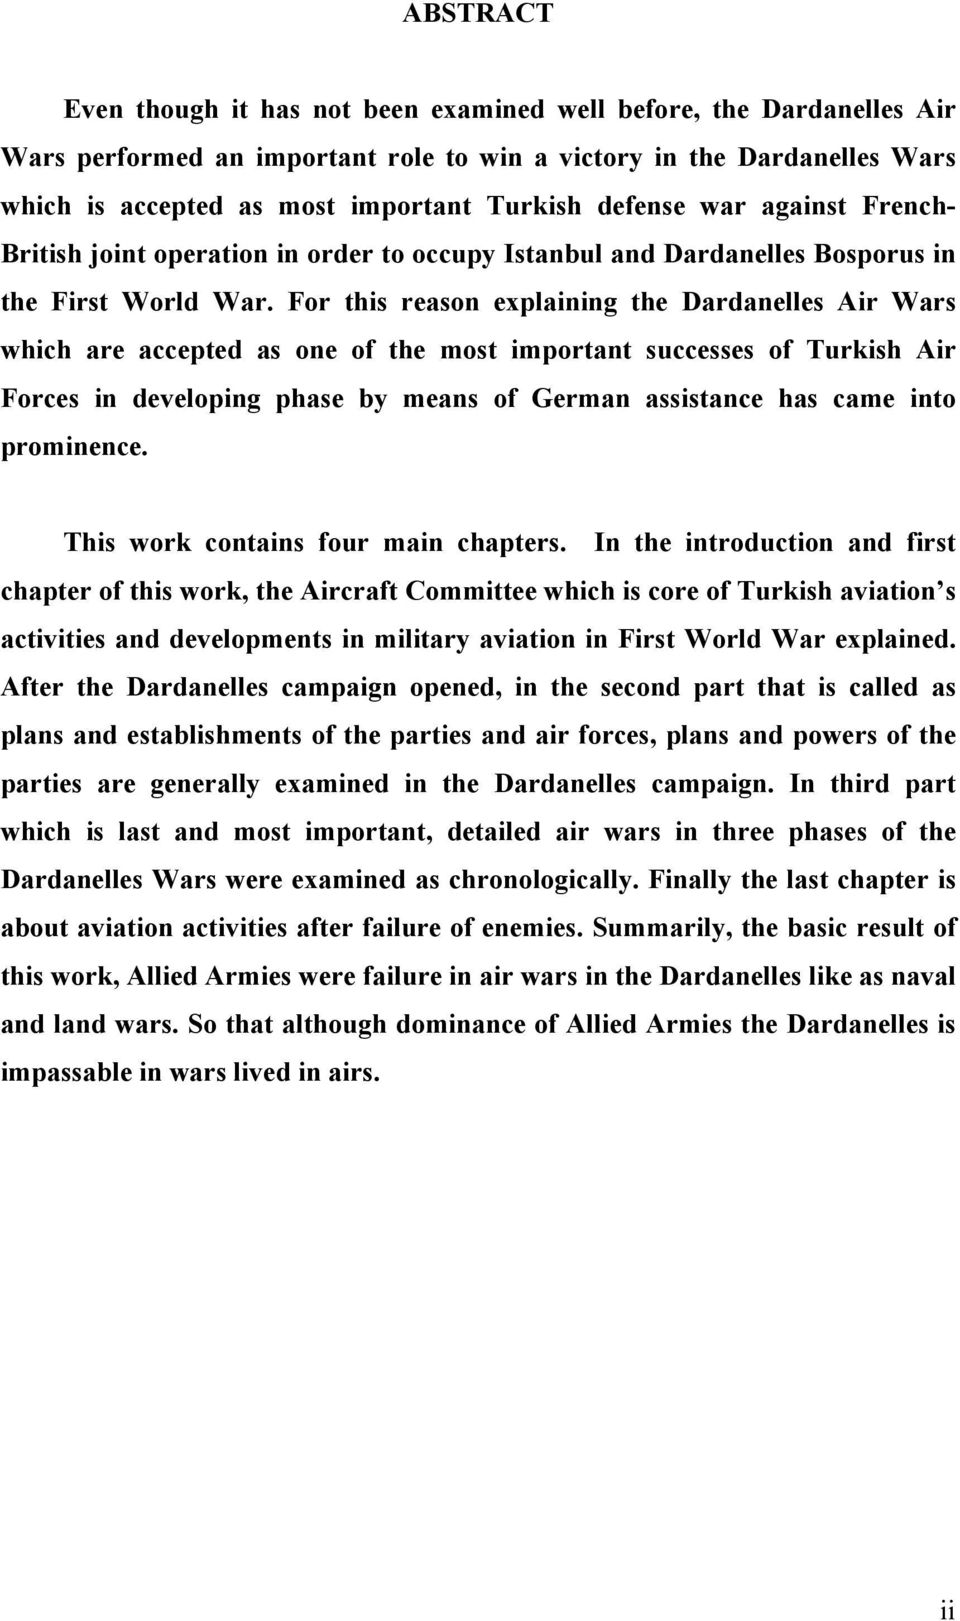 For this reason explaining the Dardanelles Air Wars which are accepted as one of the most important successes of Turkish Air Forces in developing phase by means of German assistance has came into